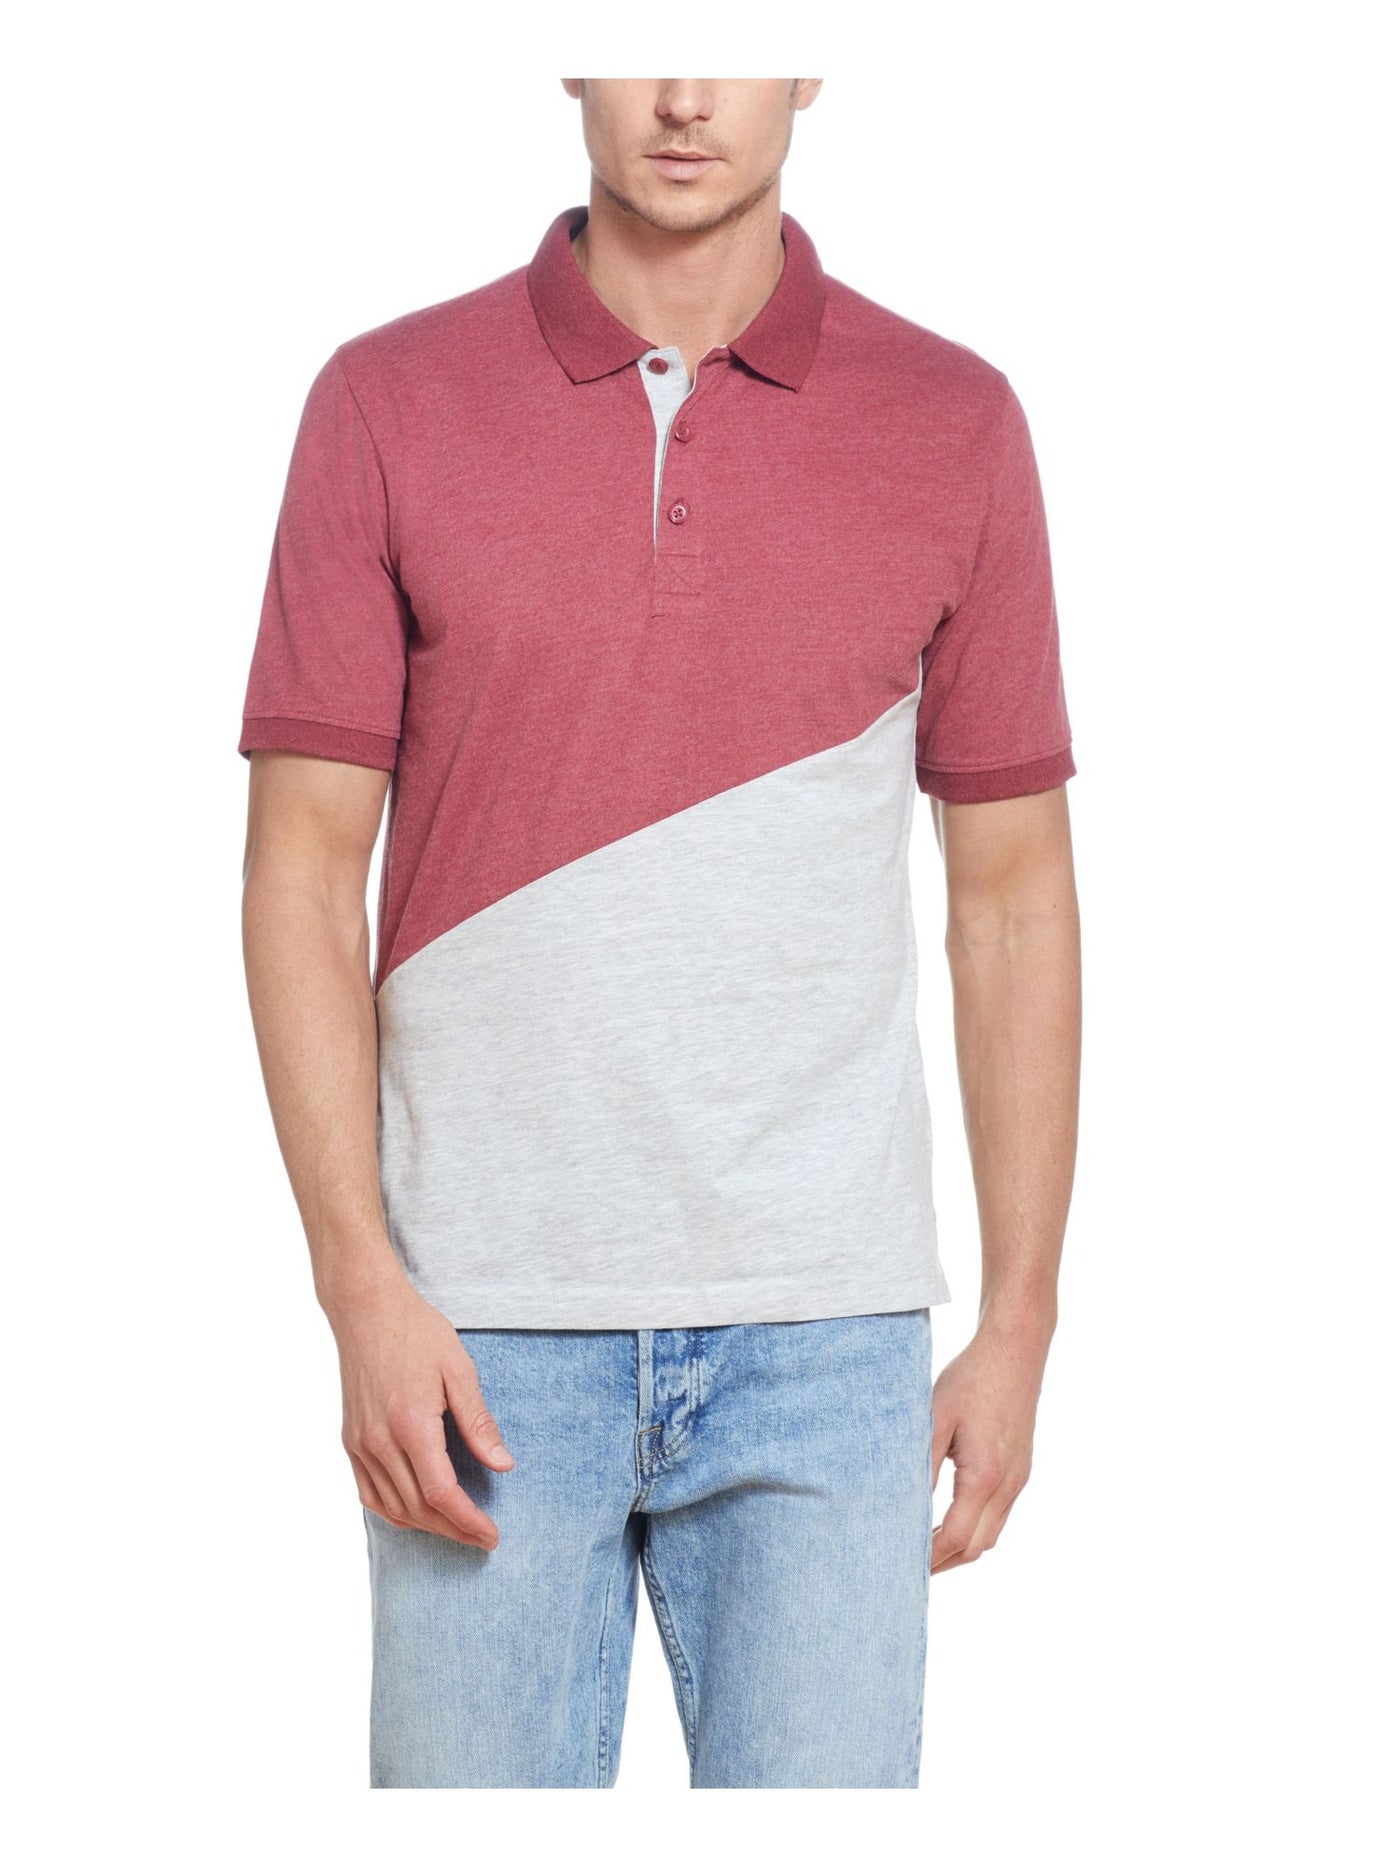 WEATHERPROOF VINTAGE Mens Red Color Block Classic Fit Jersey Polo XXL